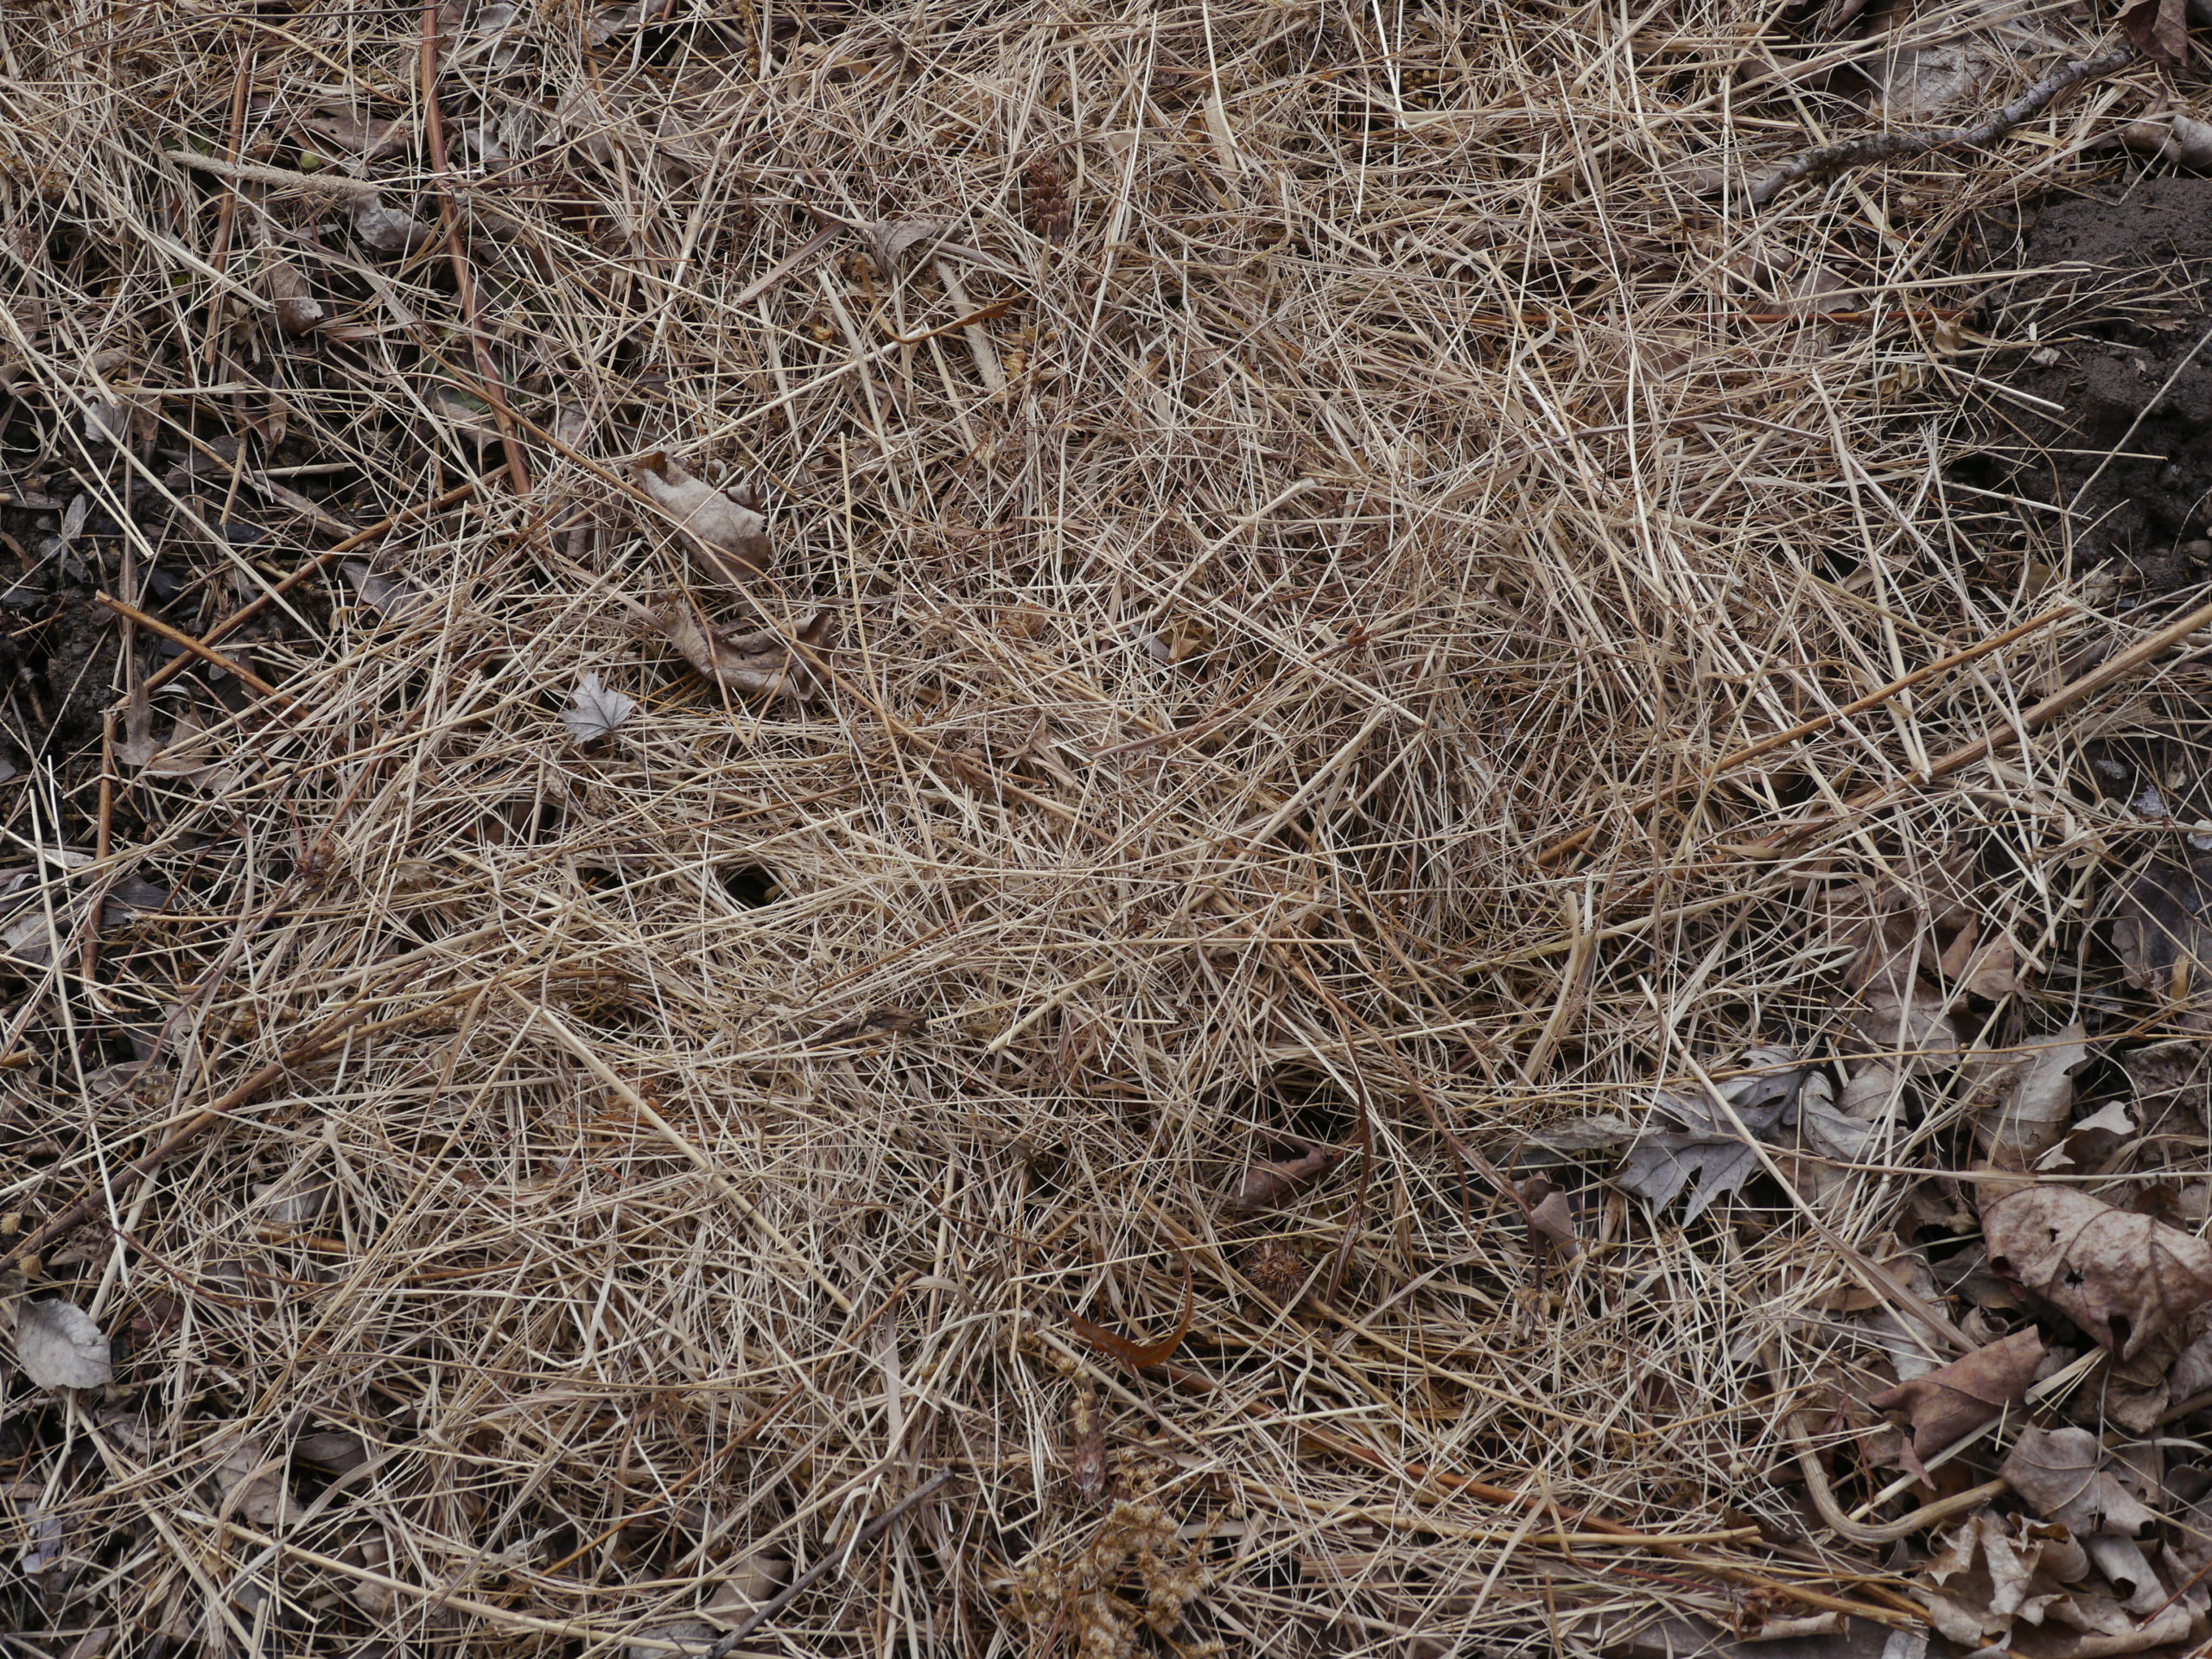 A light application of salt hay in January will protect the digitalis and primulas from wind and off and on freezing soil. But if mulched too heavily, the plant crowns can rot.